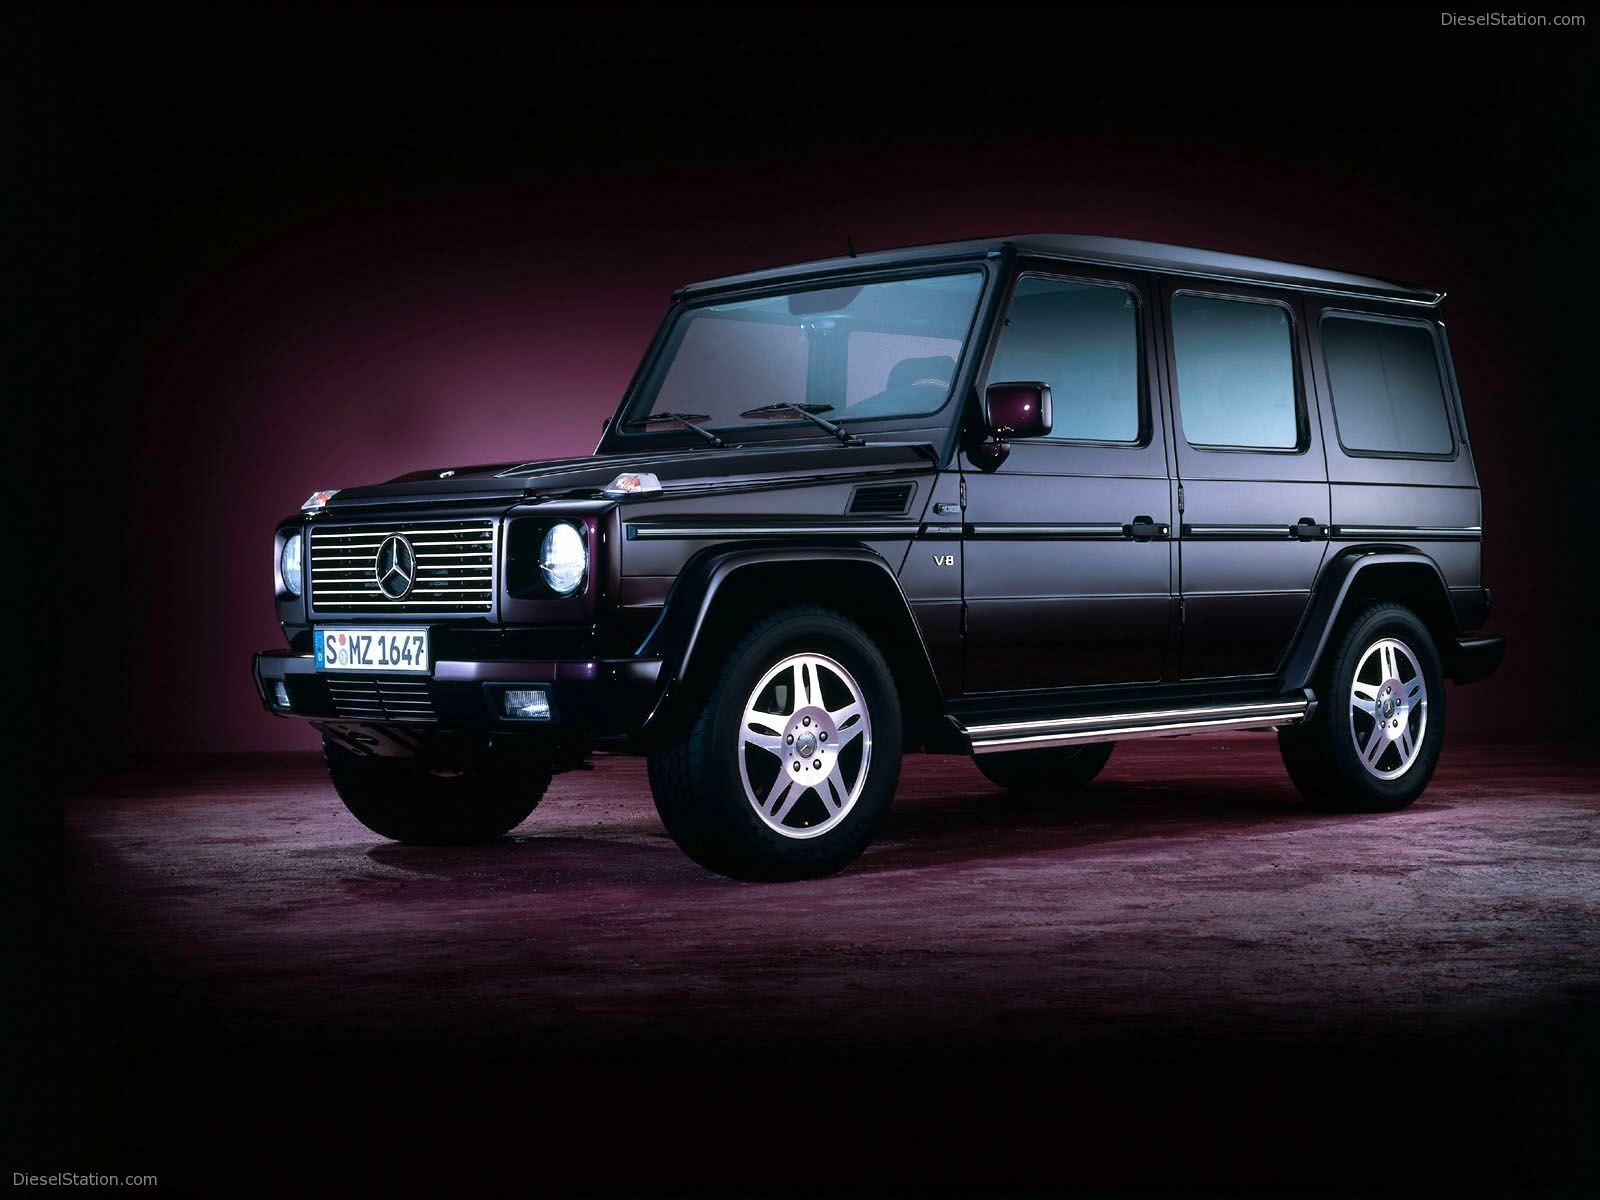 Mercedes G Class Exotic Car Image of Diesel Station